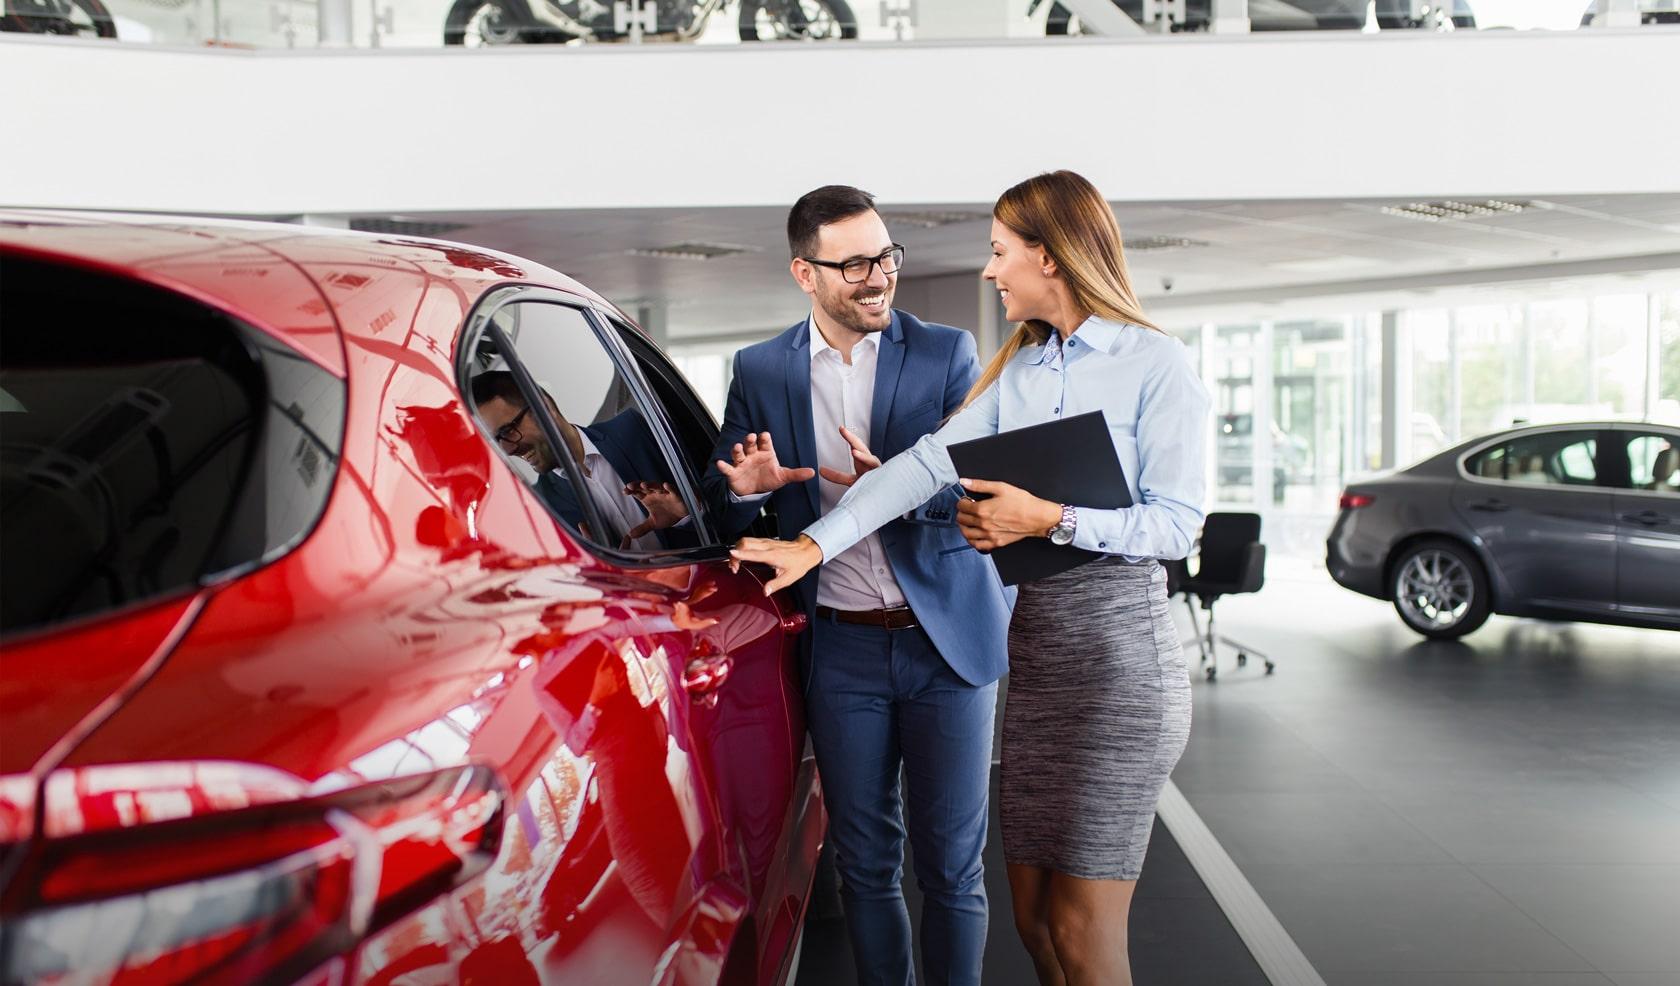 Mystery shopping in the auto industry